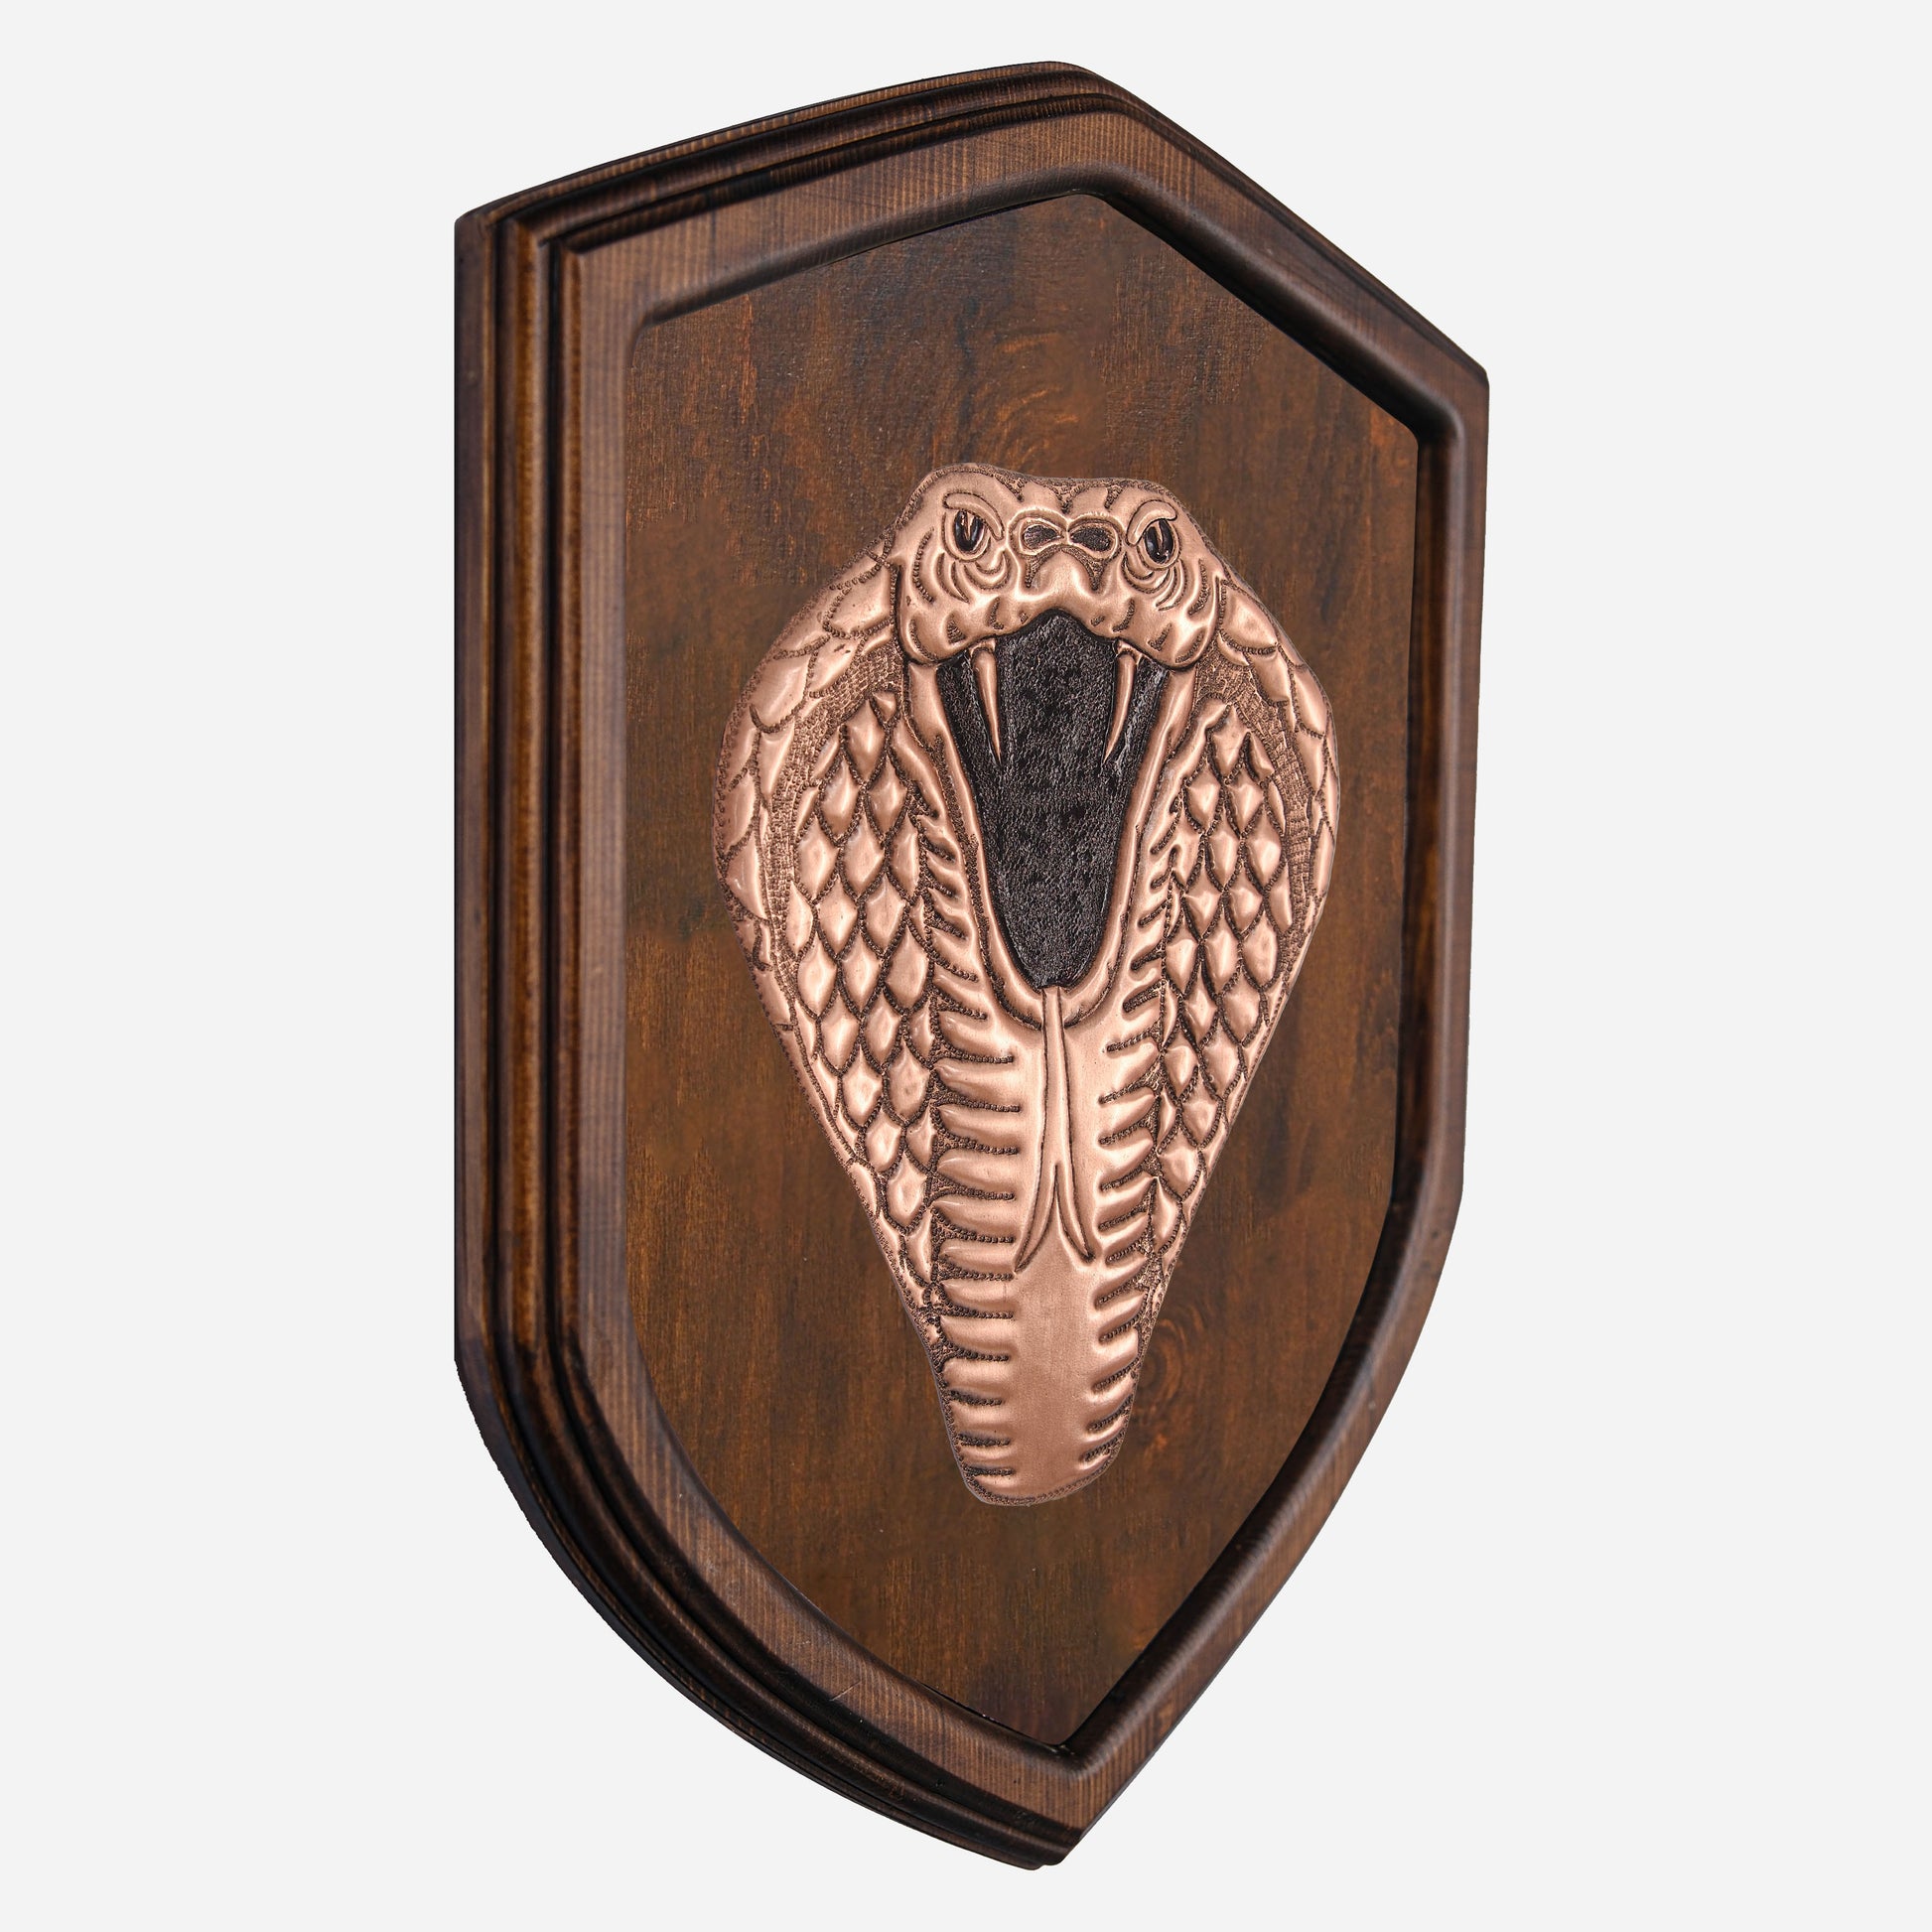 Copper Snake Head on Wood Plaque